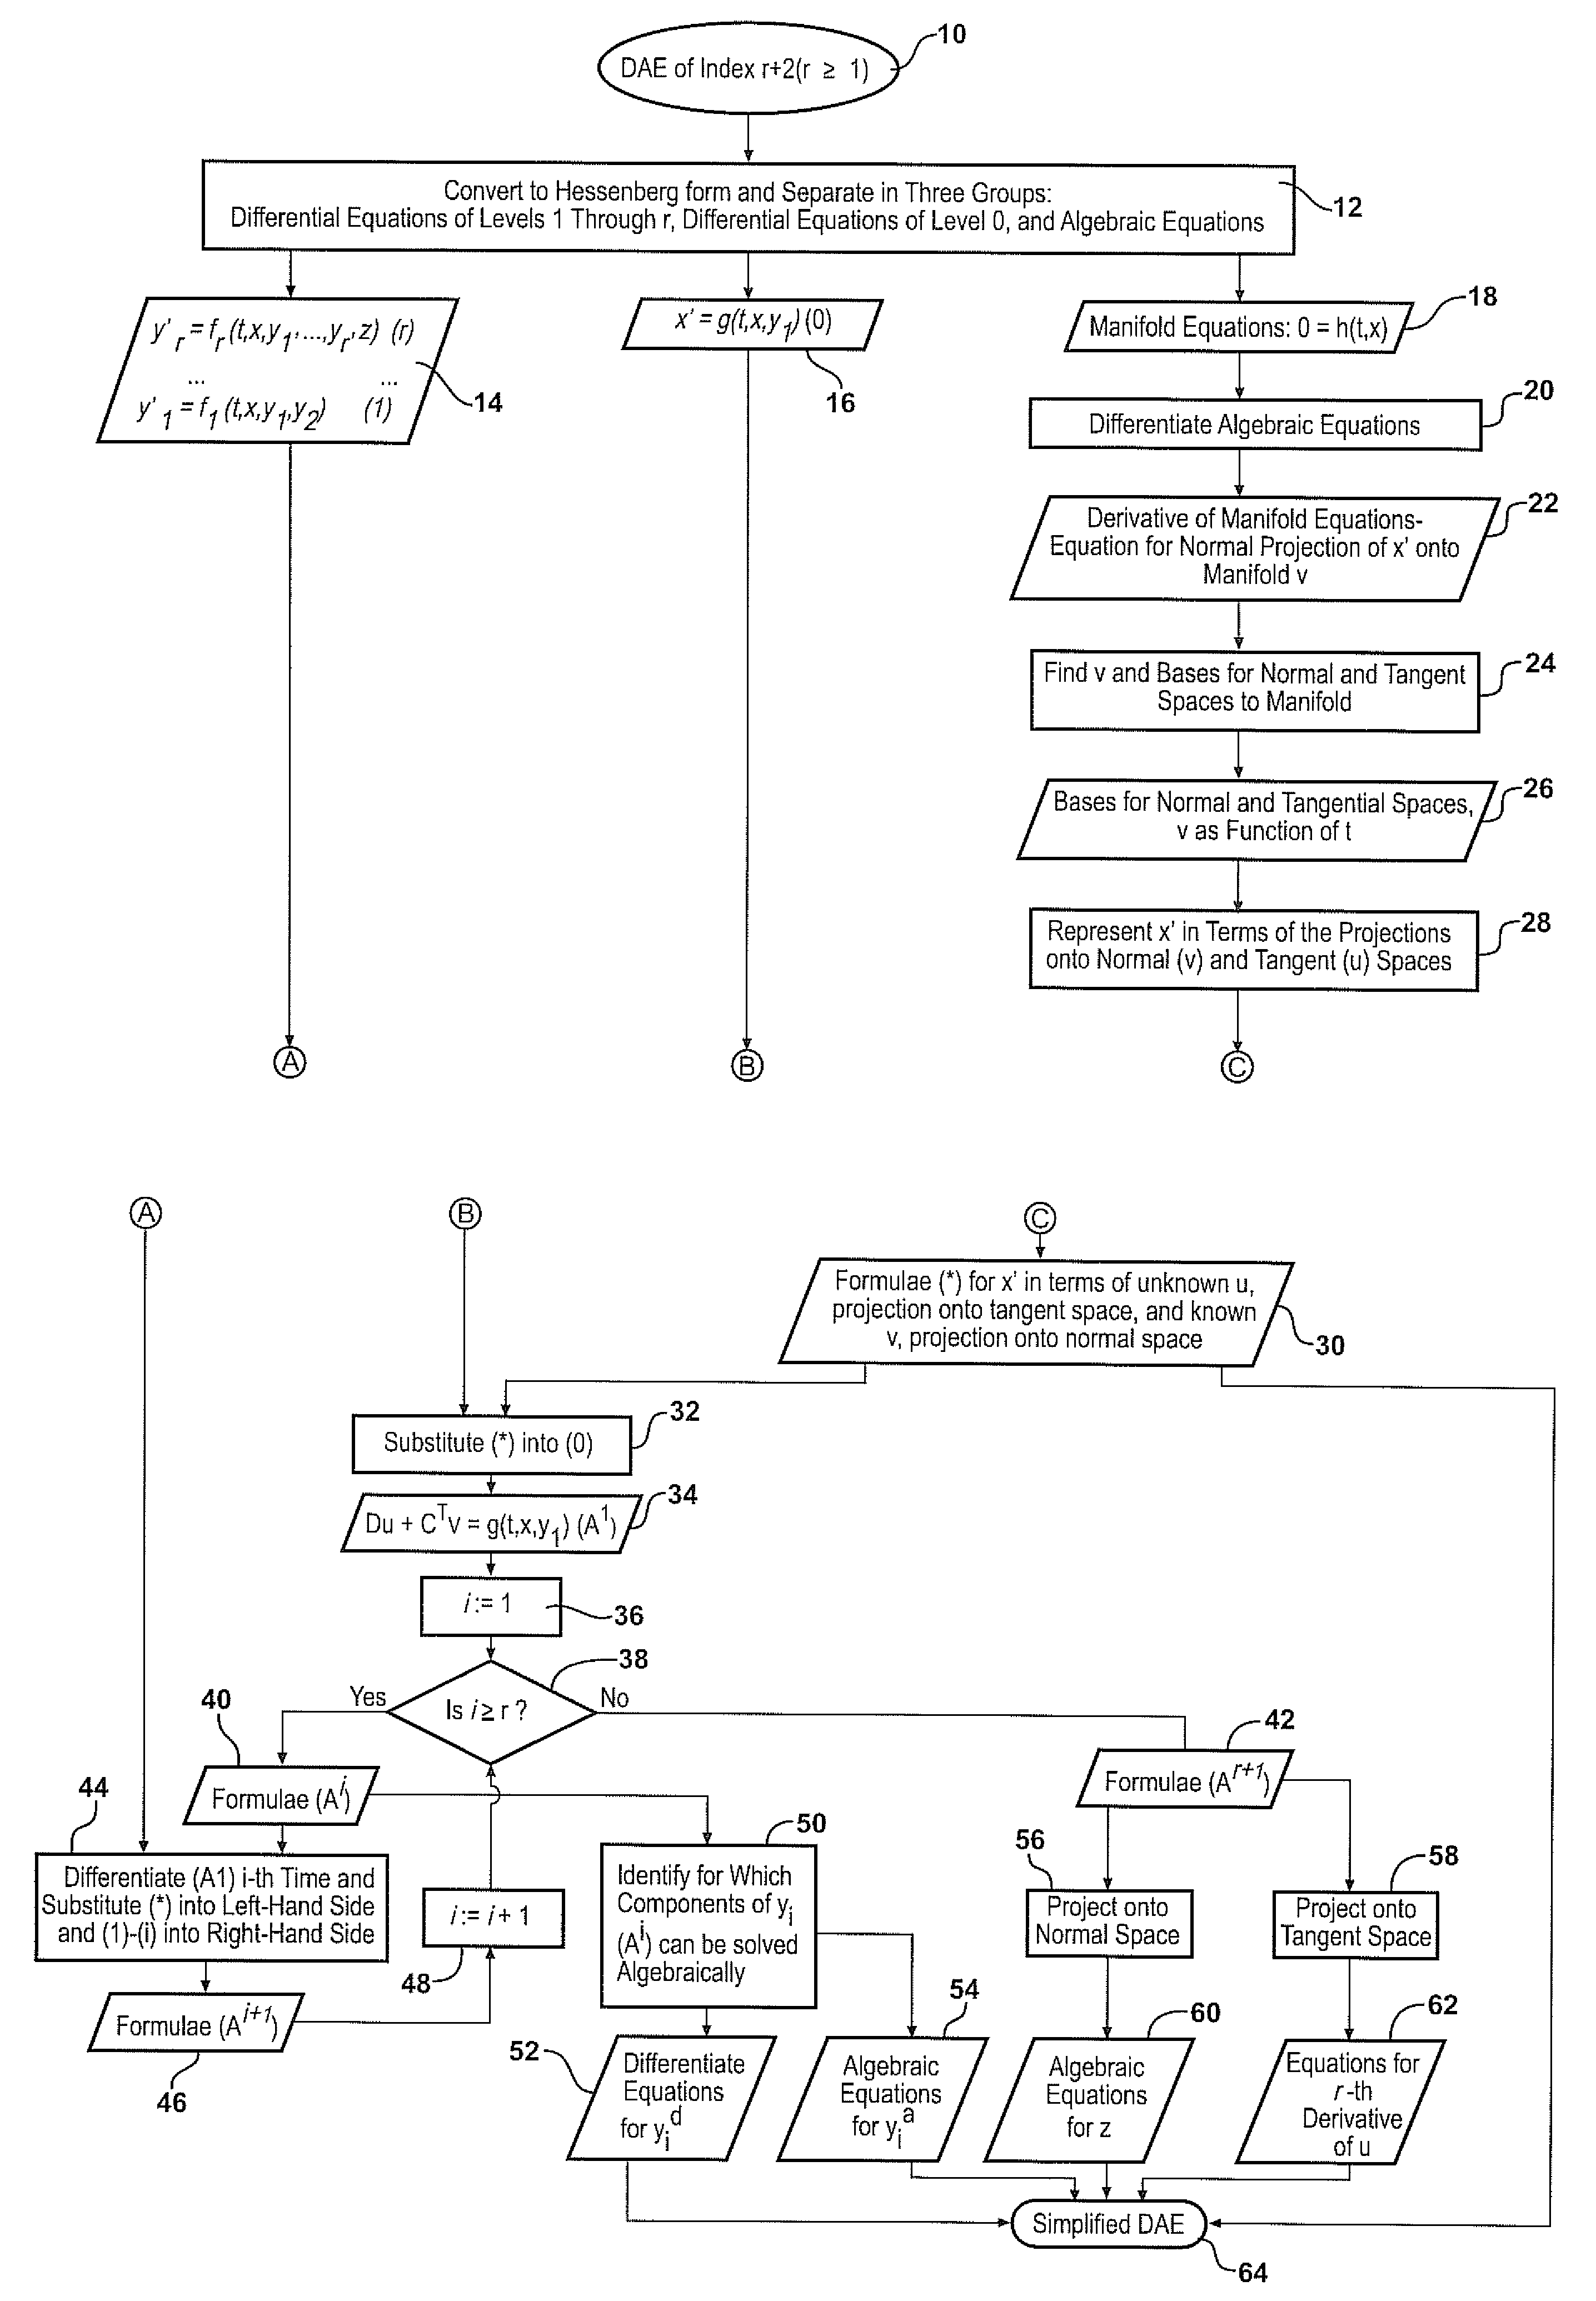 Method and system for simplifying models